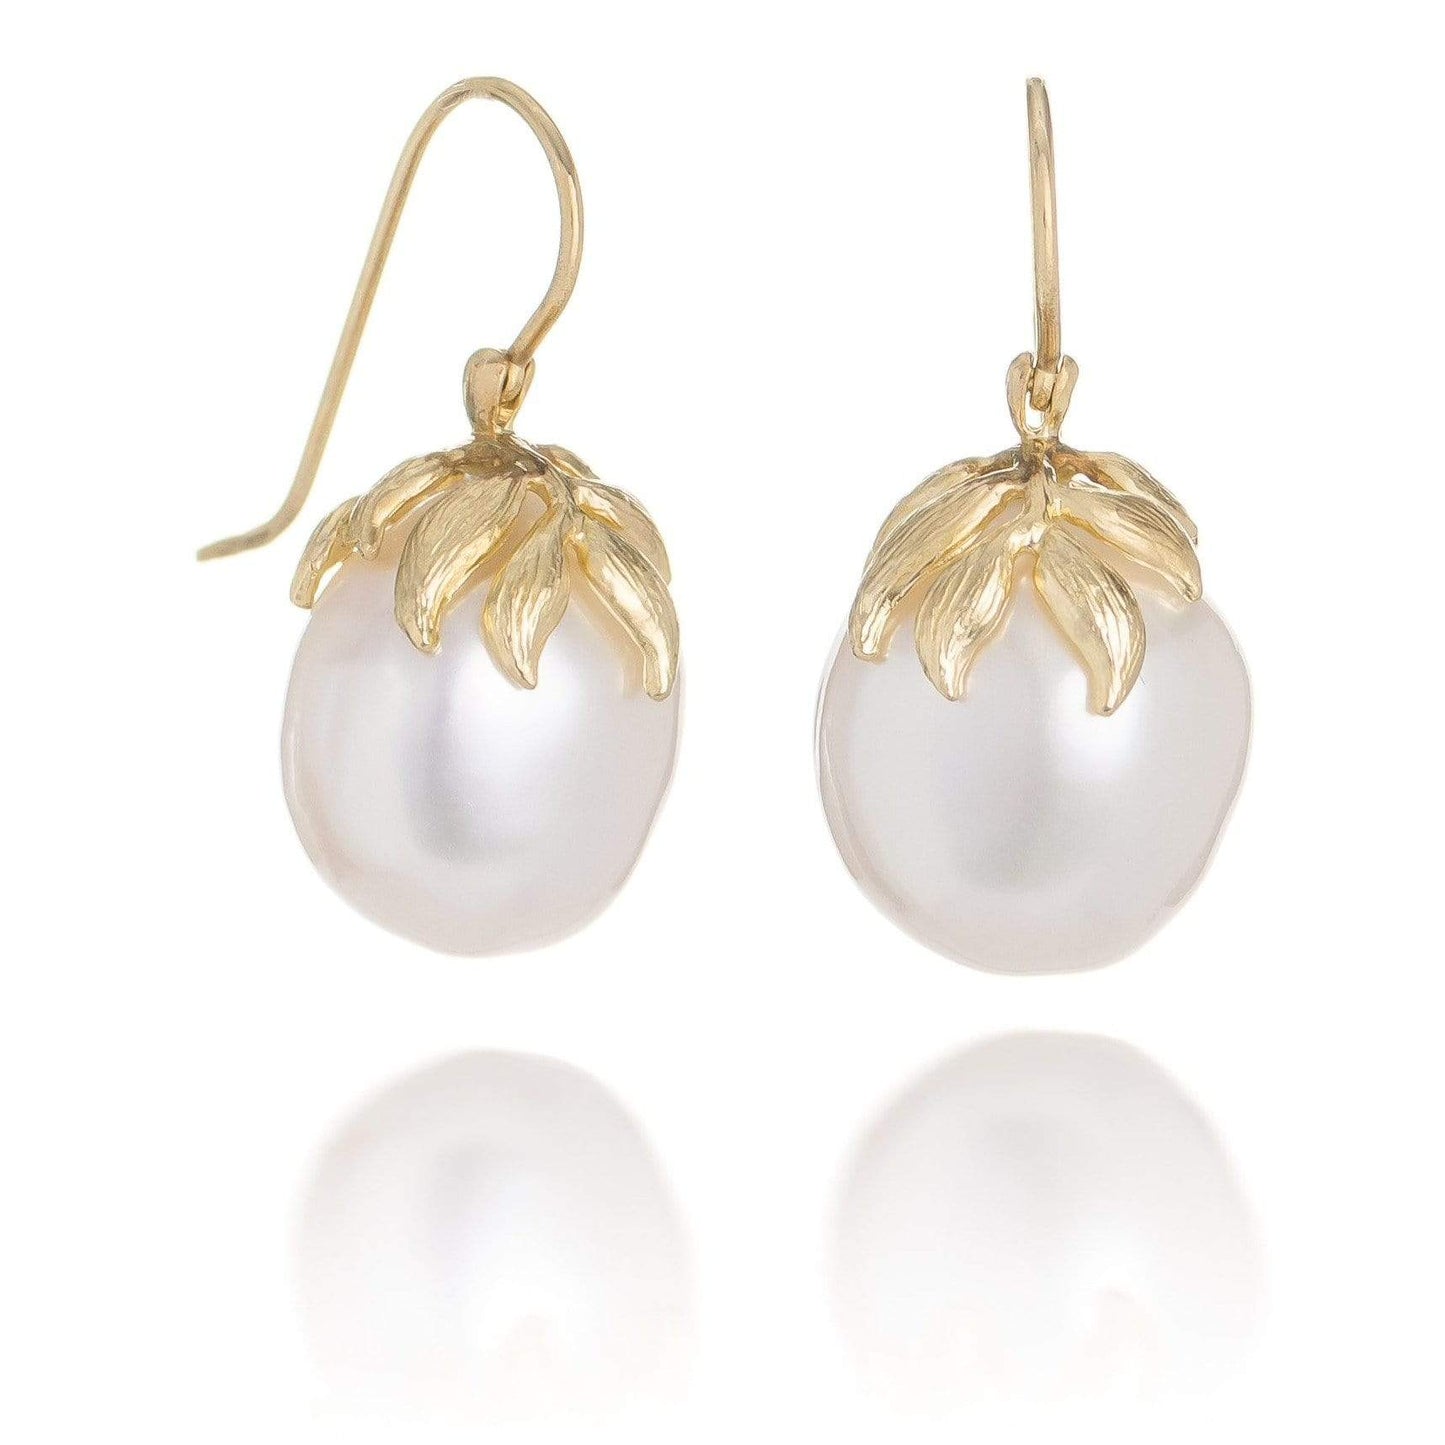 Dalia T Earrings Luster Collection 14KT Yellow Gold  Pearl Drop Earrings